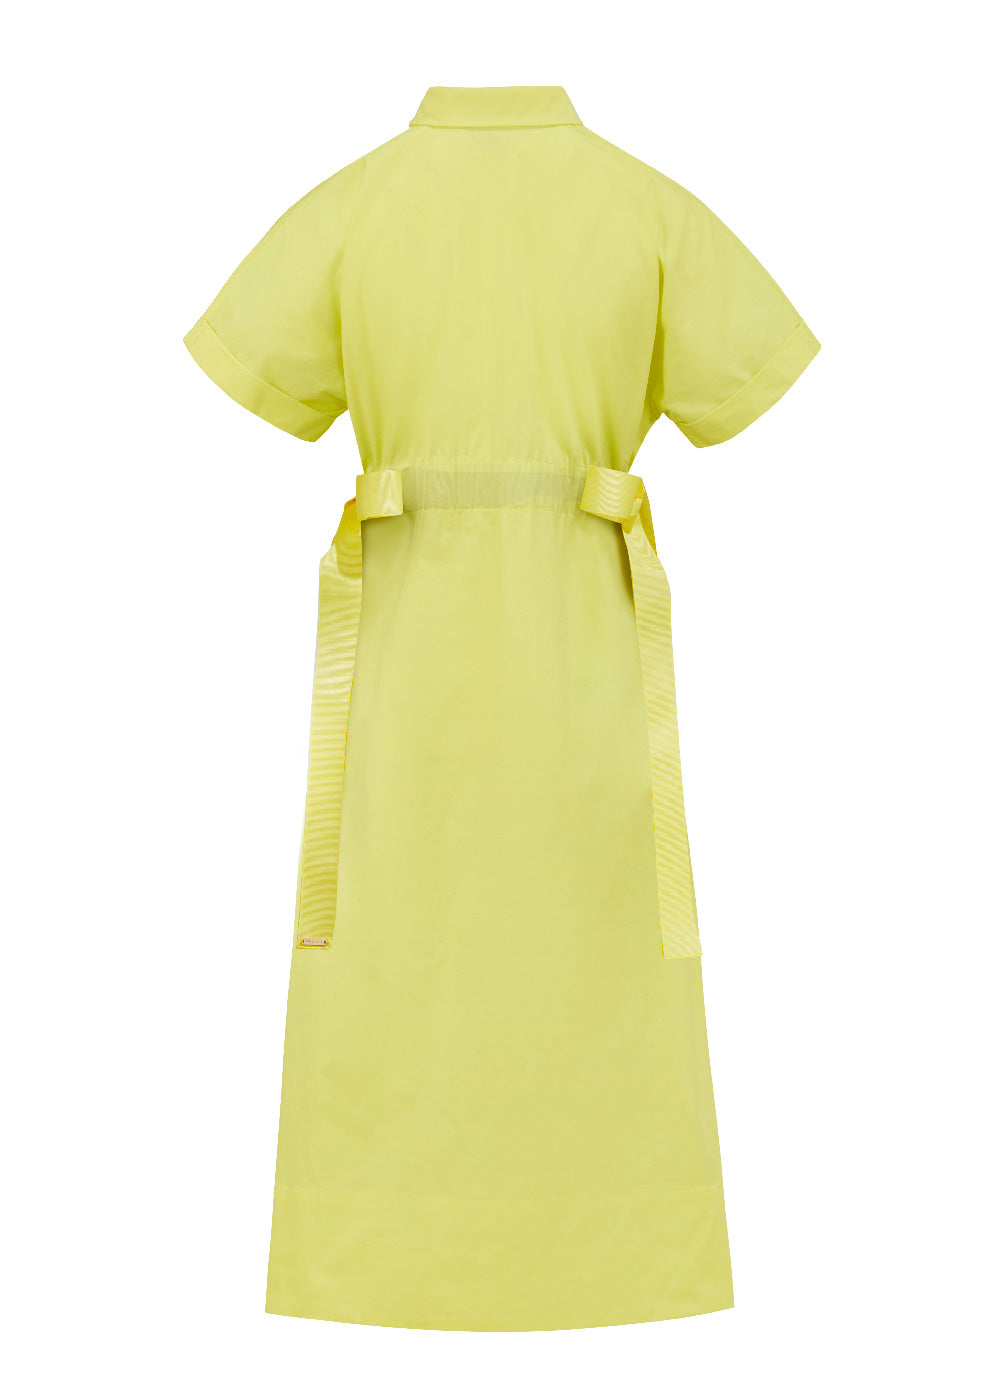 The Cotton Story : Bailey in Lemon